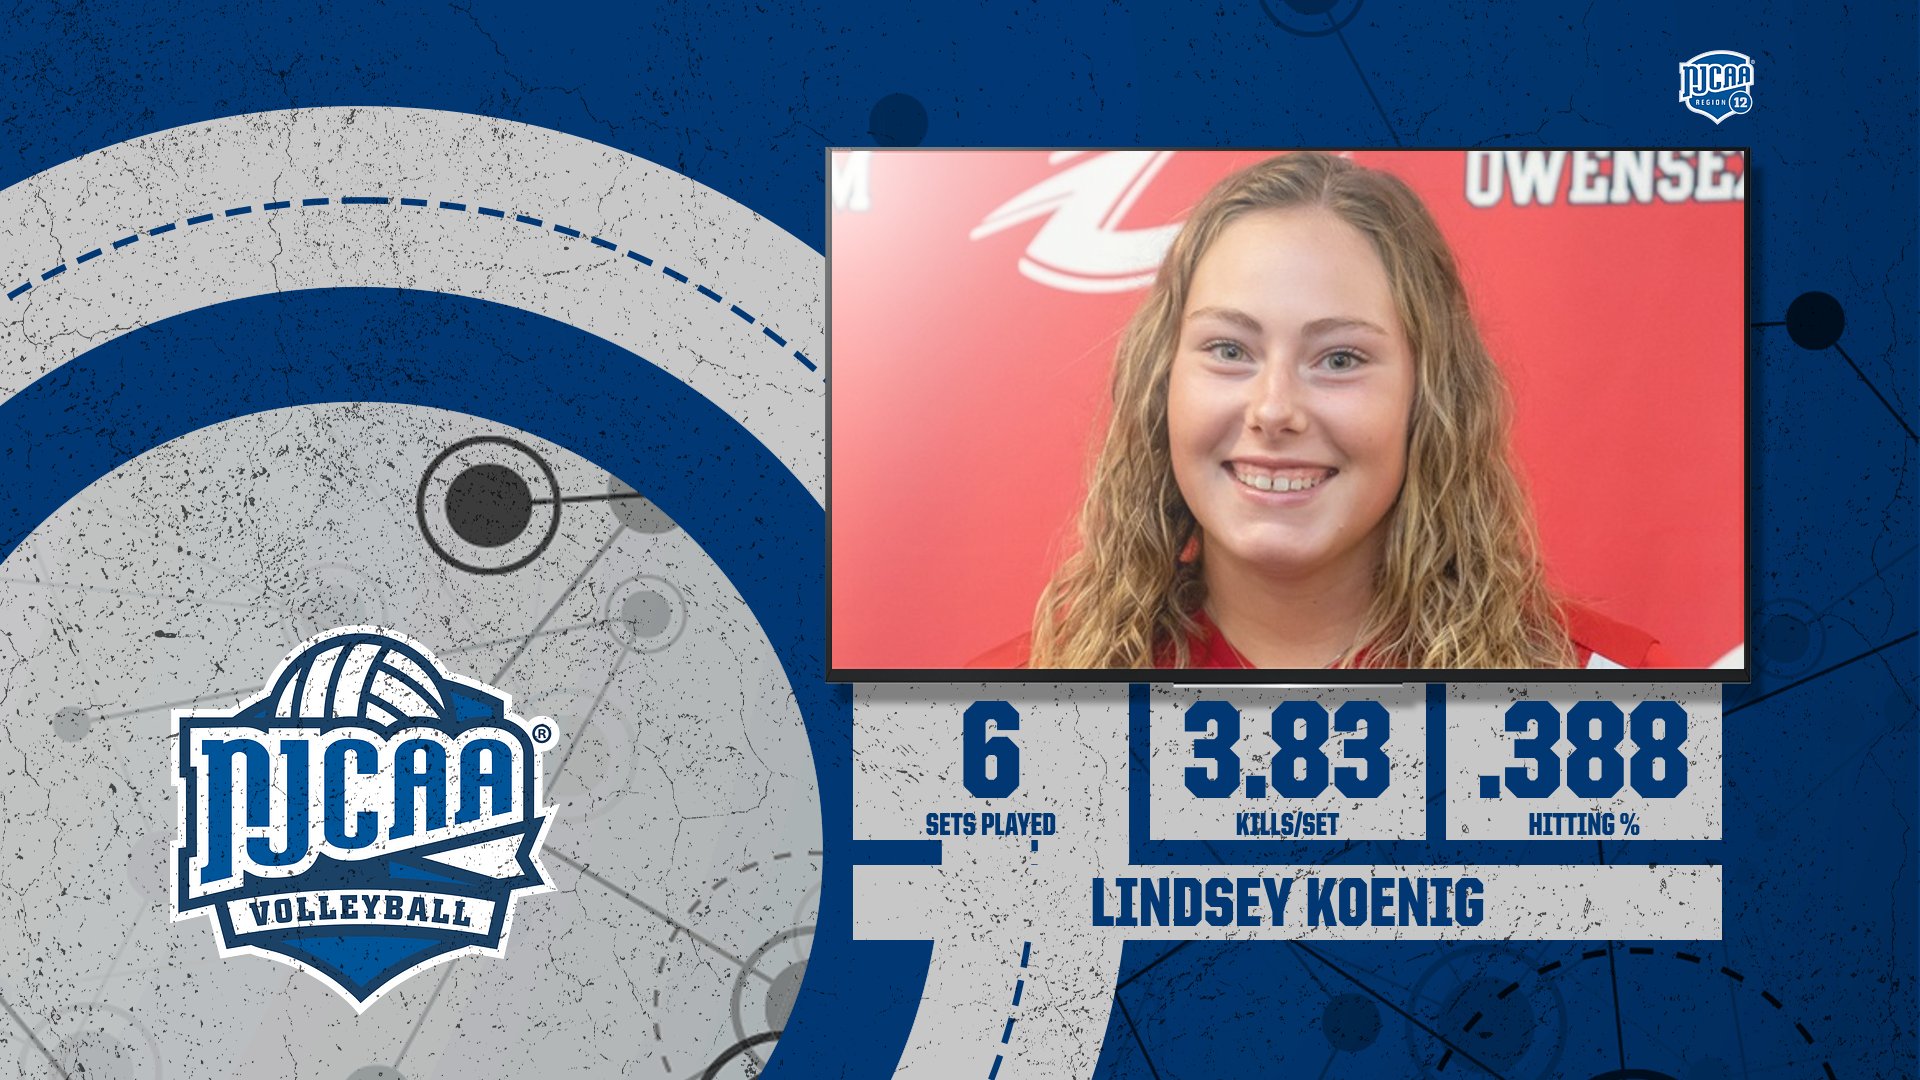 Owens CC's Koenig Tabbed NJCAA Division III Volleyball Offensive Player of the Week